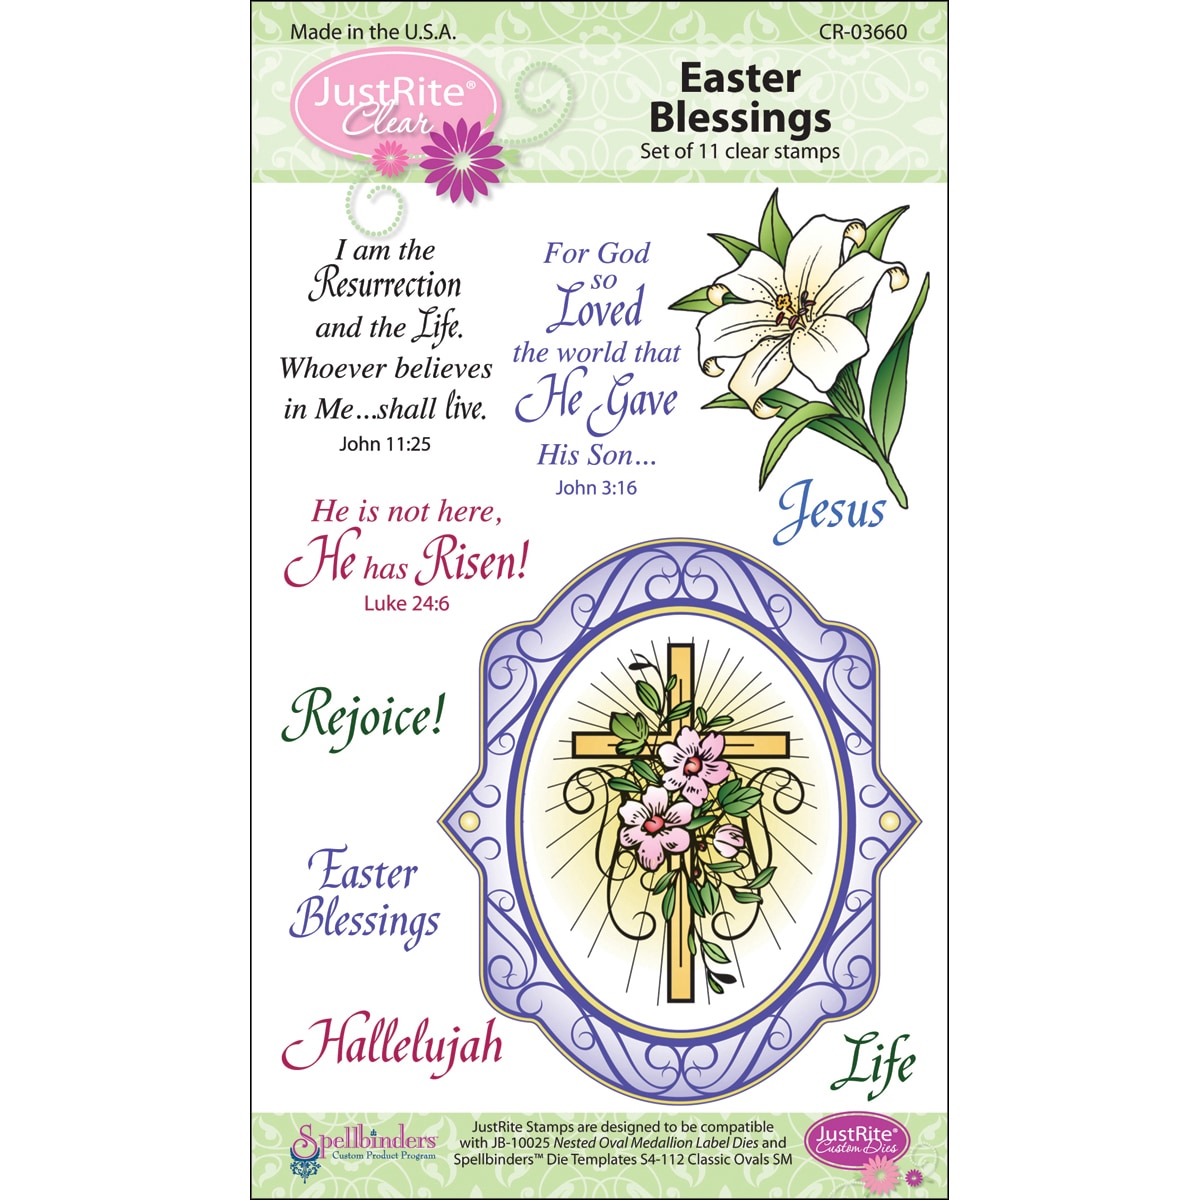 Justrite Stampers Clear Stamp Sets easter Blessings Oval Medallions 11pc